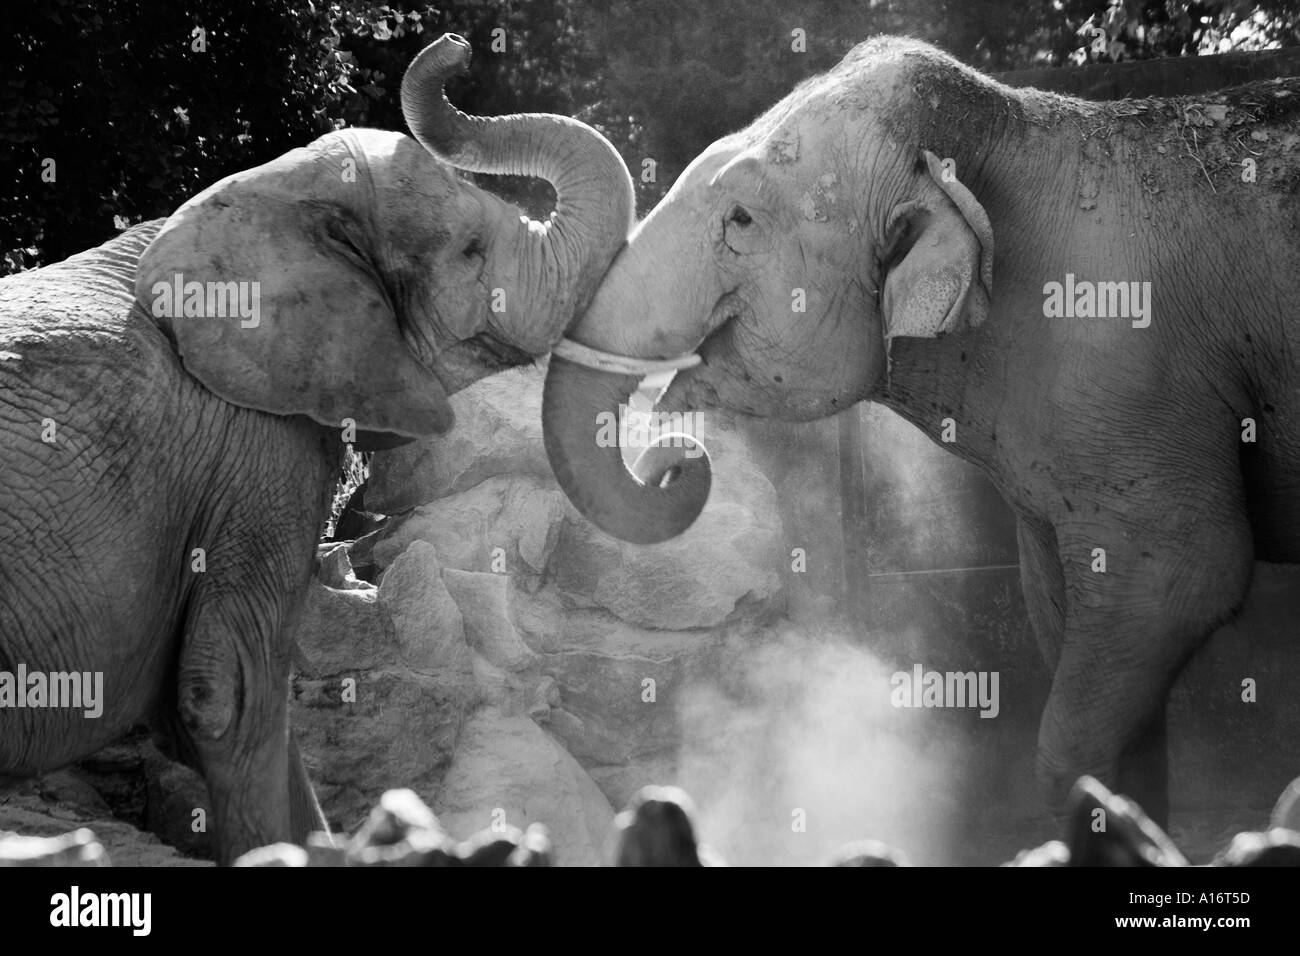 two elephants at Philadelphia Zoo in Pennsylvania facing each other trunk to trunk dust flying black white image Stock Photo